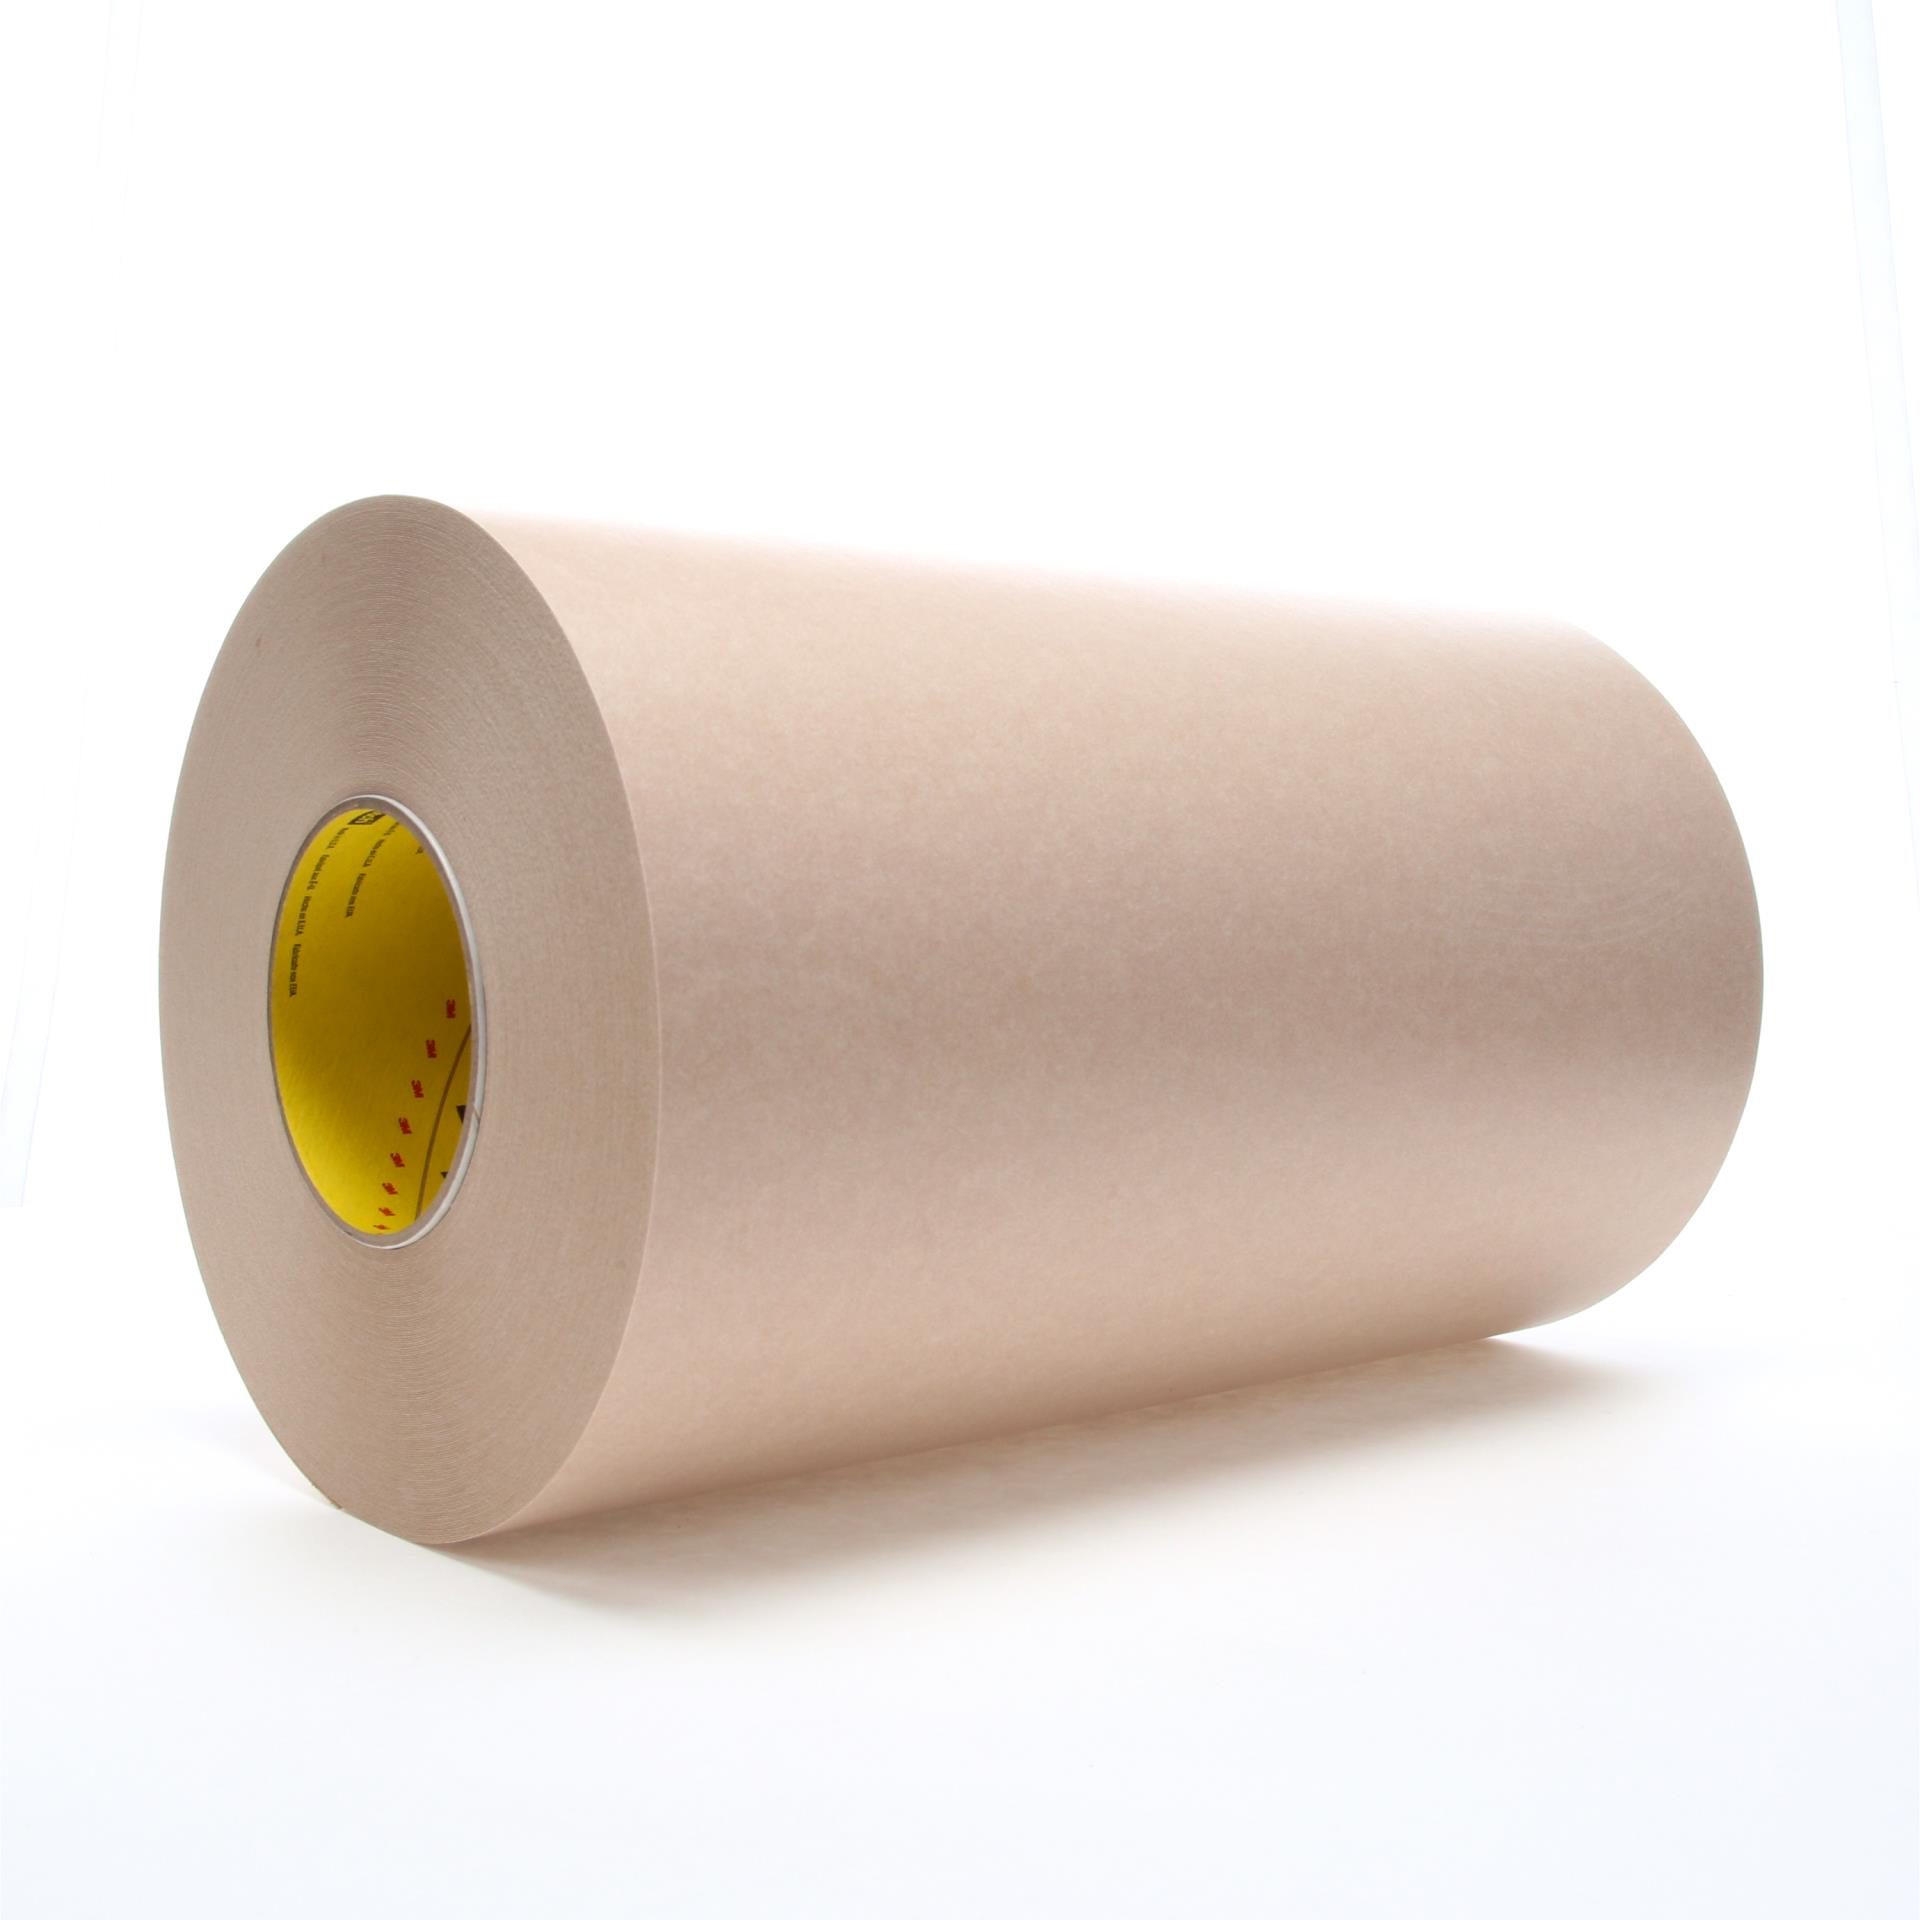 Hand-Masker General Purpose Masking Paper MPG12, 12 in x 60 yd, 1 Roll